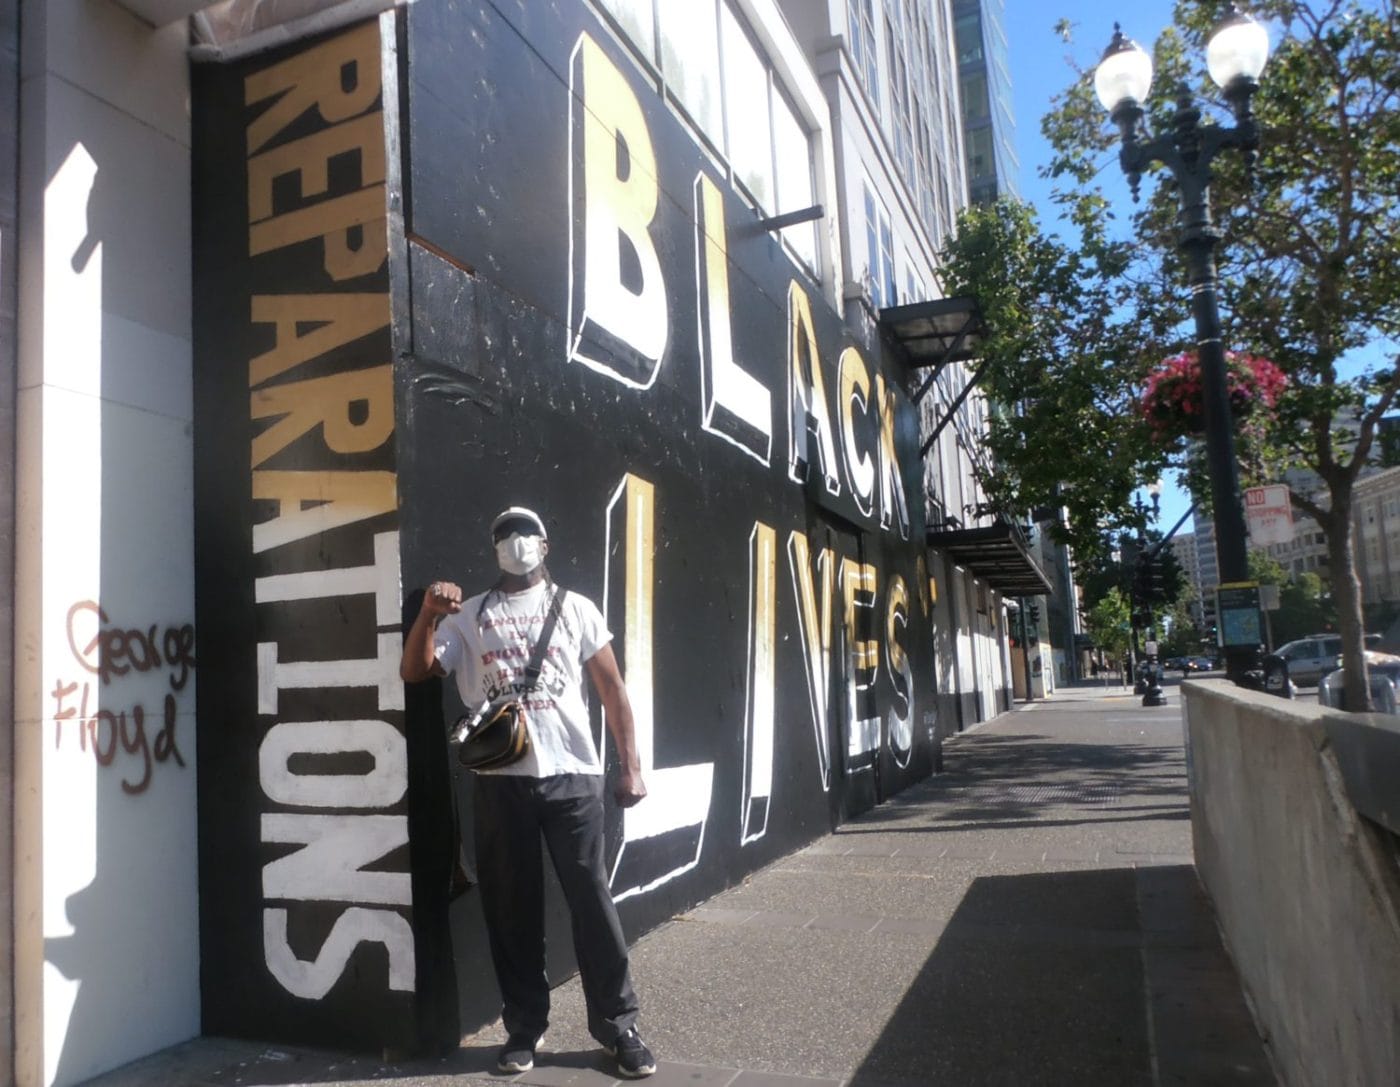 Jahahara-reparations-mural-in-Black-Arts-Movement-and-Business-District-downtown-Oakland-0720-1400x1087, Imagine reparations!, Culture Currents 